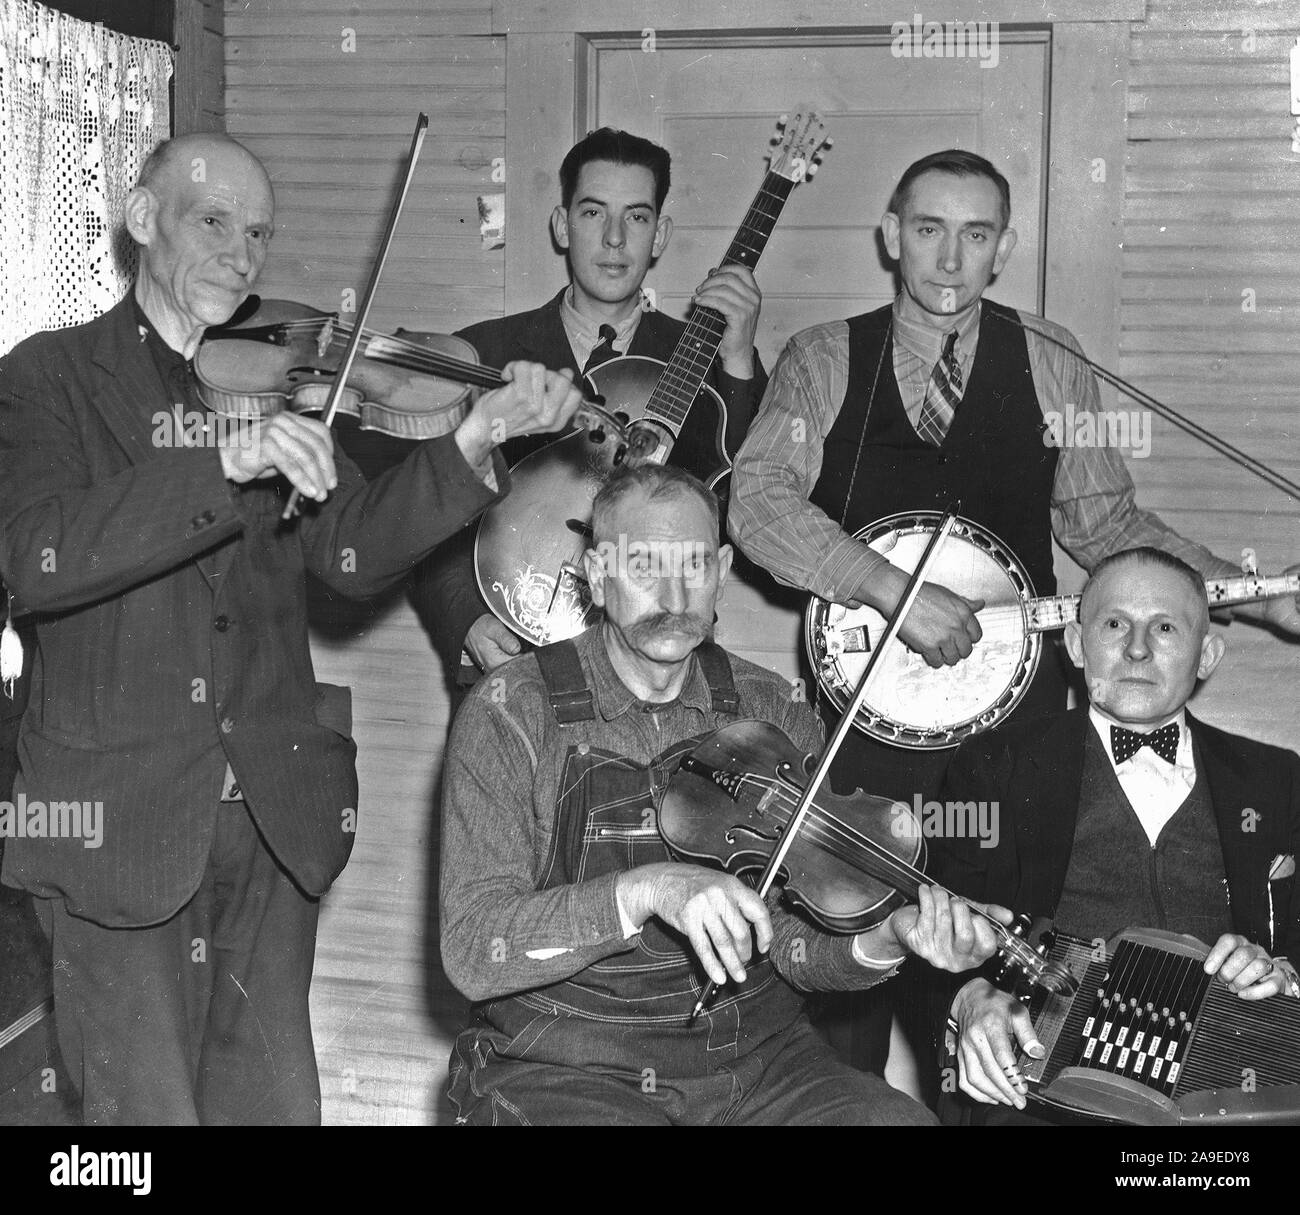 Members of the Bog Trotters Band, posed holding their instruments, Galax, Va. Back row: Uncle Alex Dunford, fiddle; Fields Ward, guitar; Wade Ward, banjo. Front row: Crockett Ward, fiddle; Doc Davis, autoharp Stock Photo